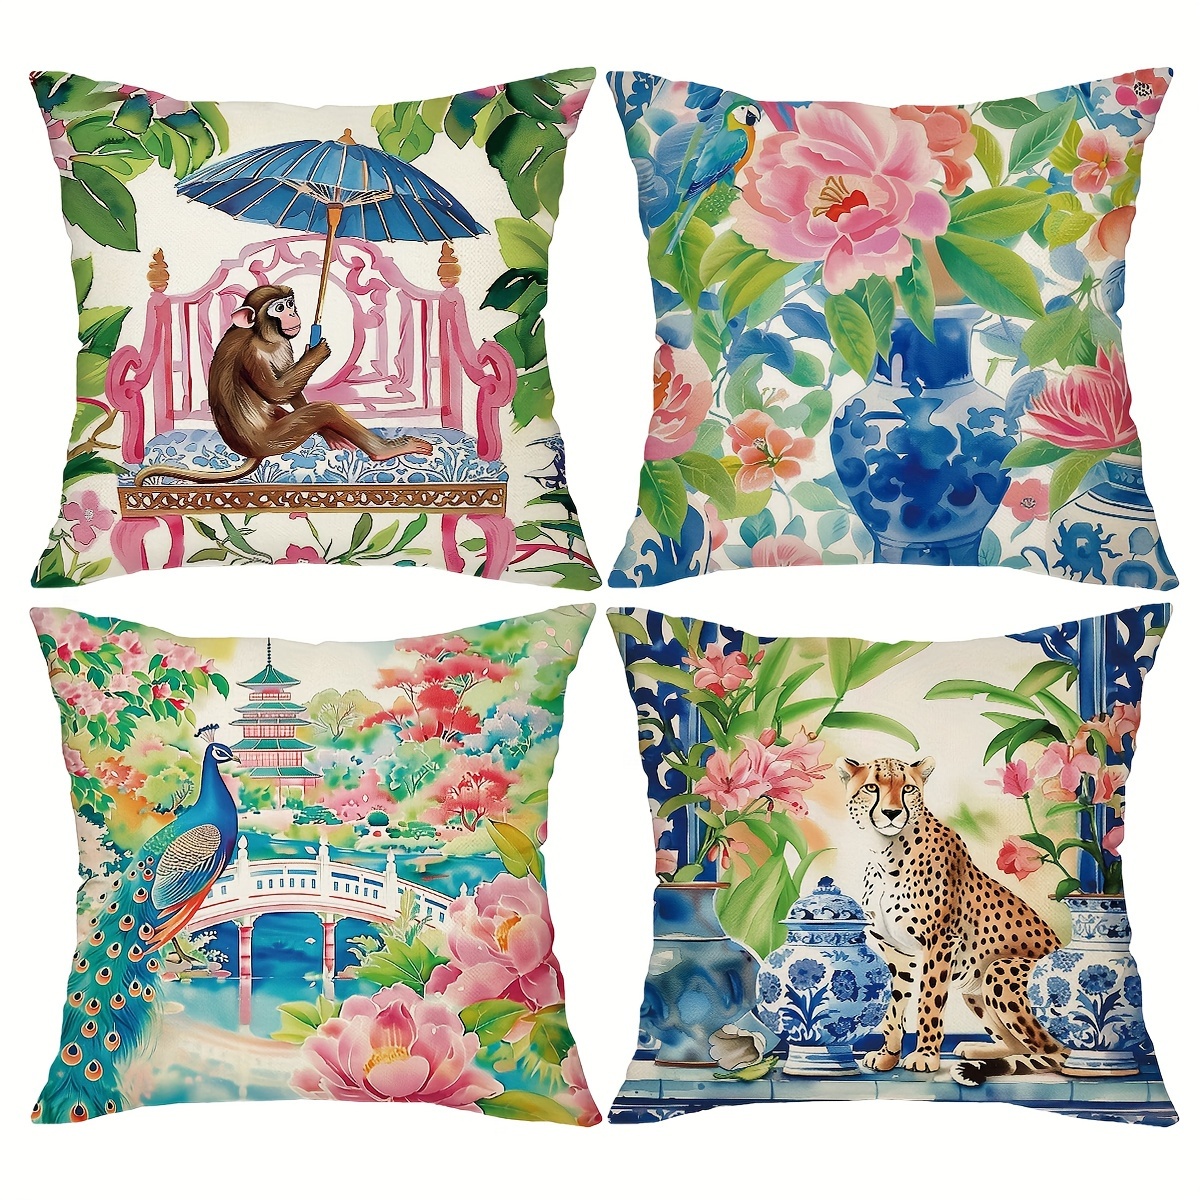 

4-piece Vintage Blue & White Floral & Peacock Throw Pillow Covers - 18x18 Inch, Linen Blend, Zip Closure - Perfect For Living Room, Patio, And Bedroom Decor